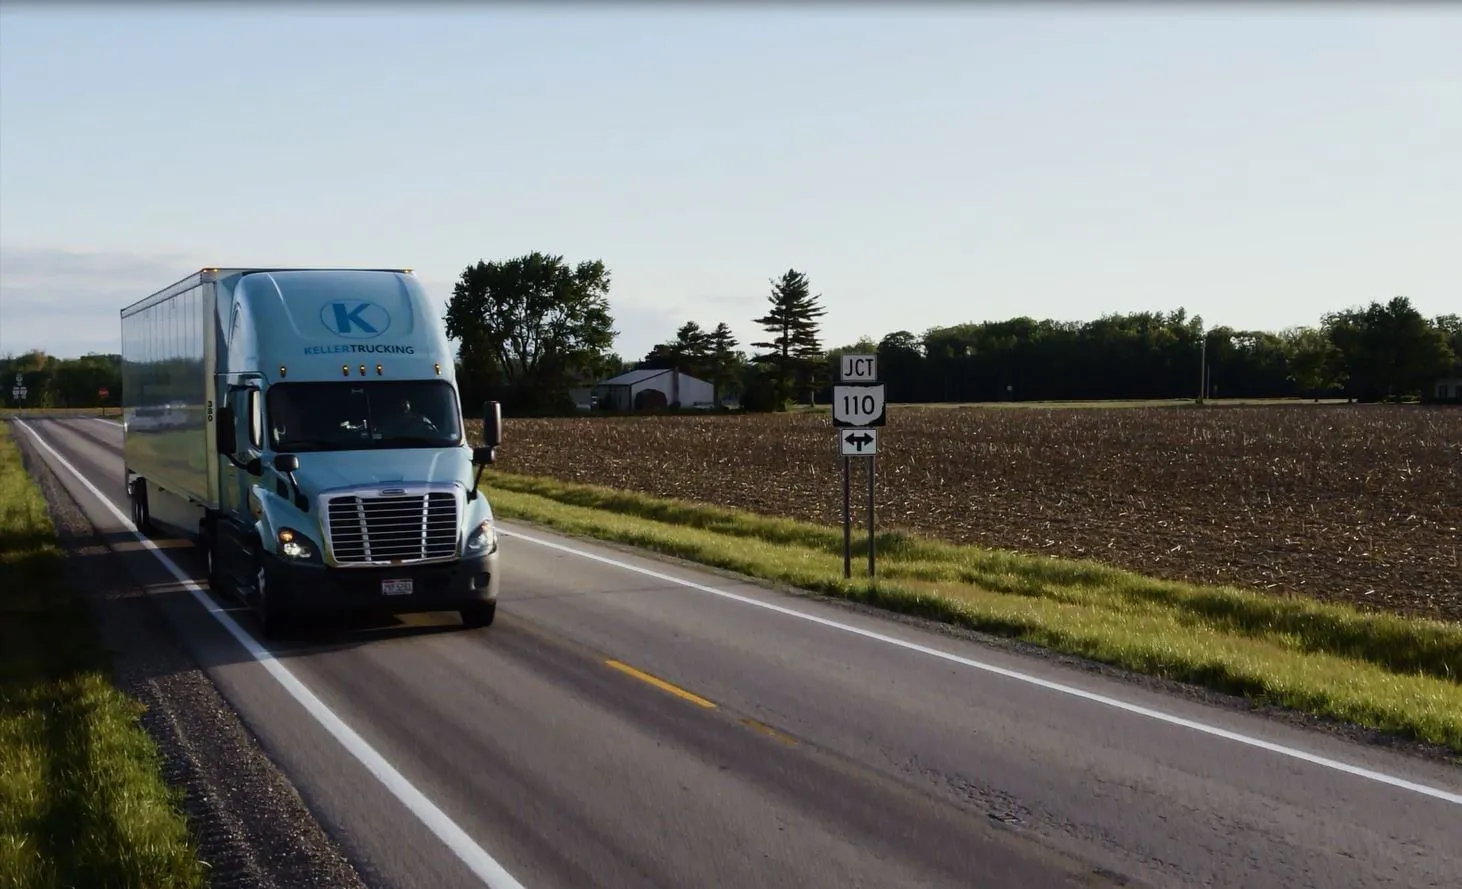 Truck from Keller Trucking driving with farmland in the background